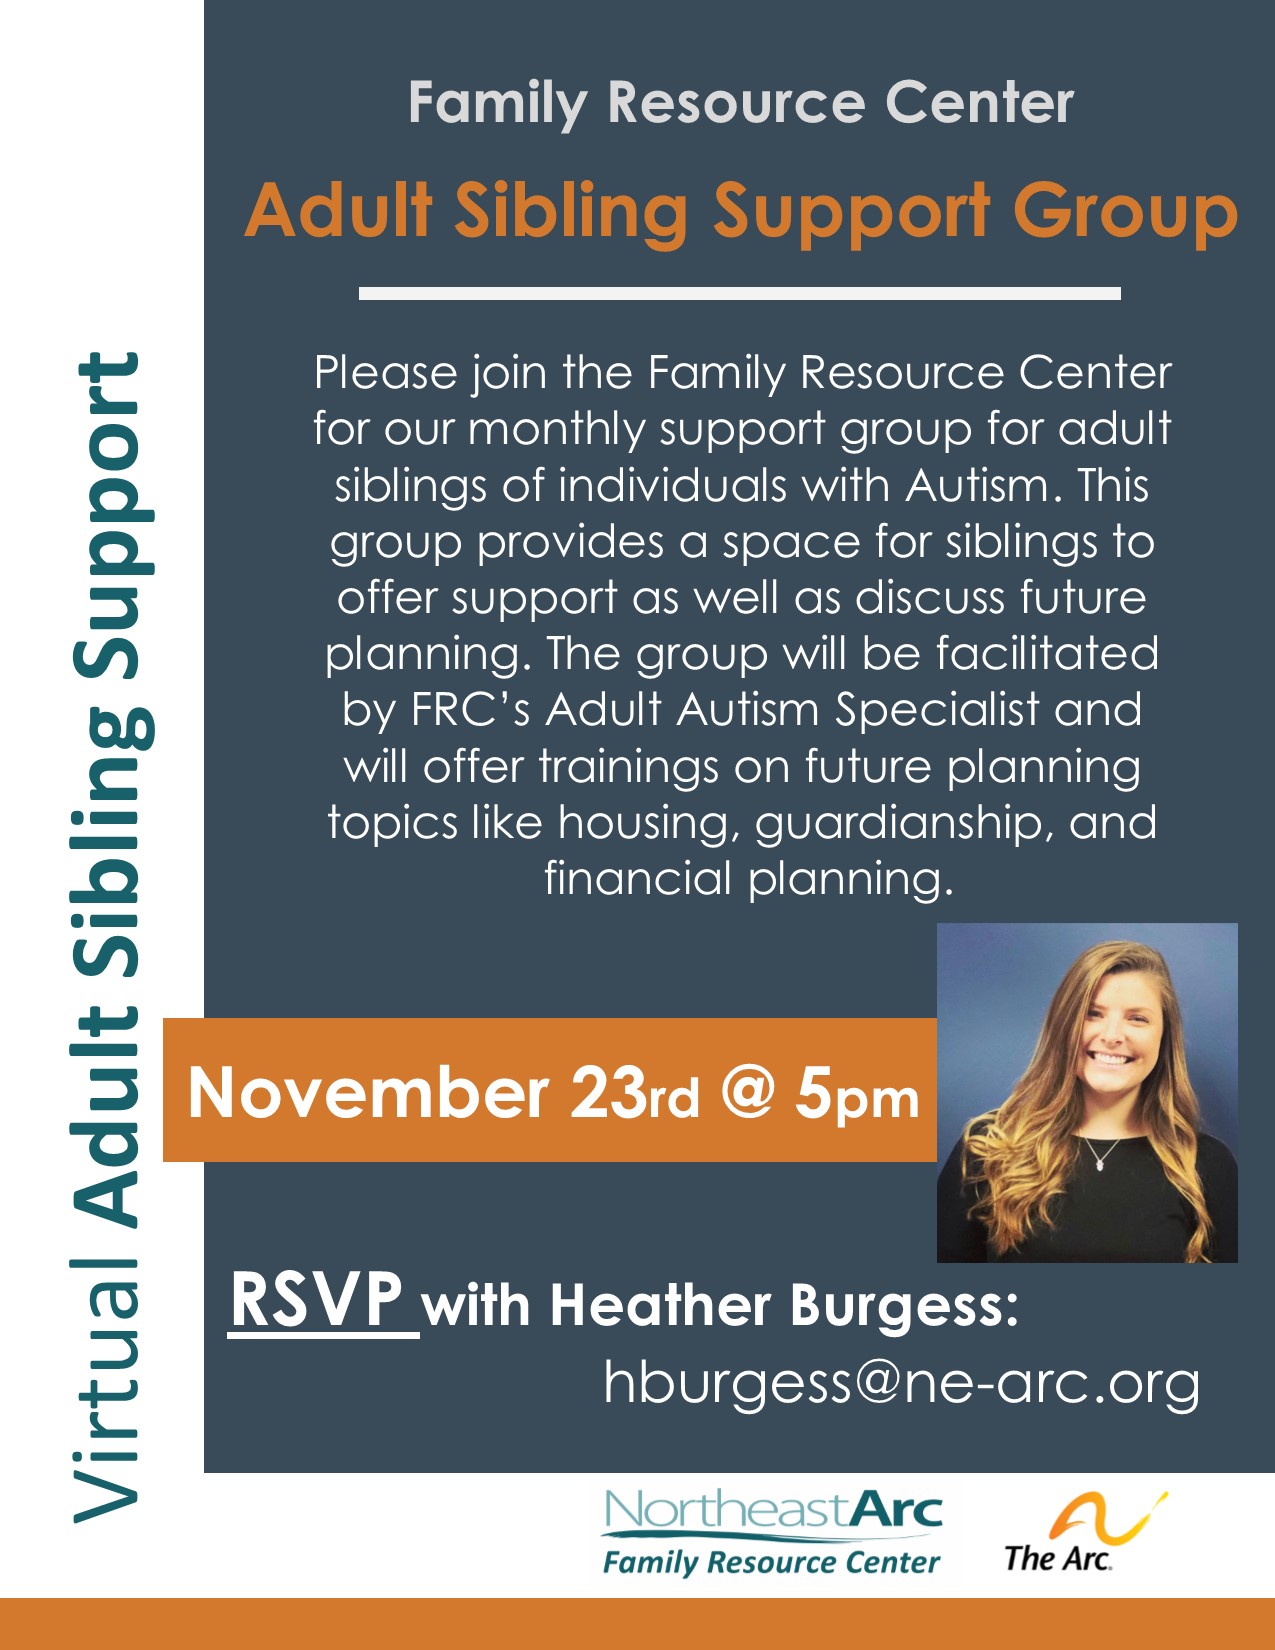 Flyer for Adult Sibling Support Group for siblings of individuals with autism, 11/23 at 5pm, RSVP at hburgess@ne-arc.org